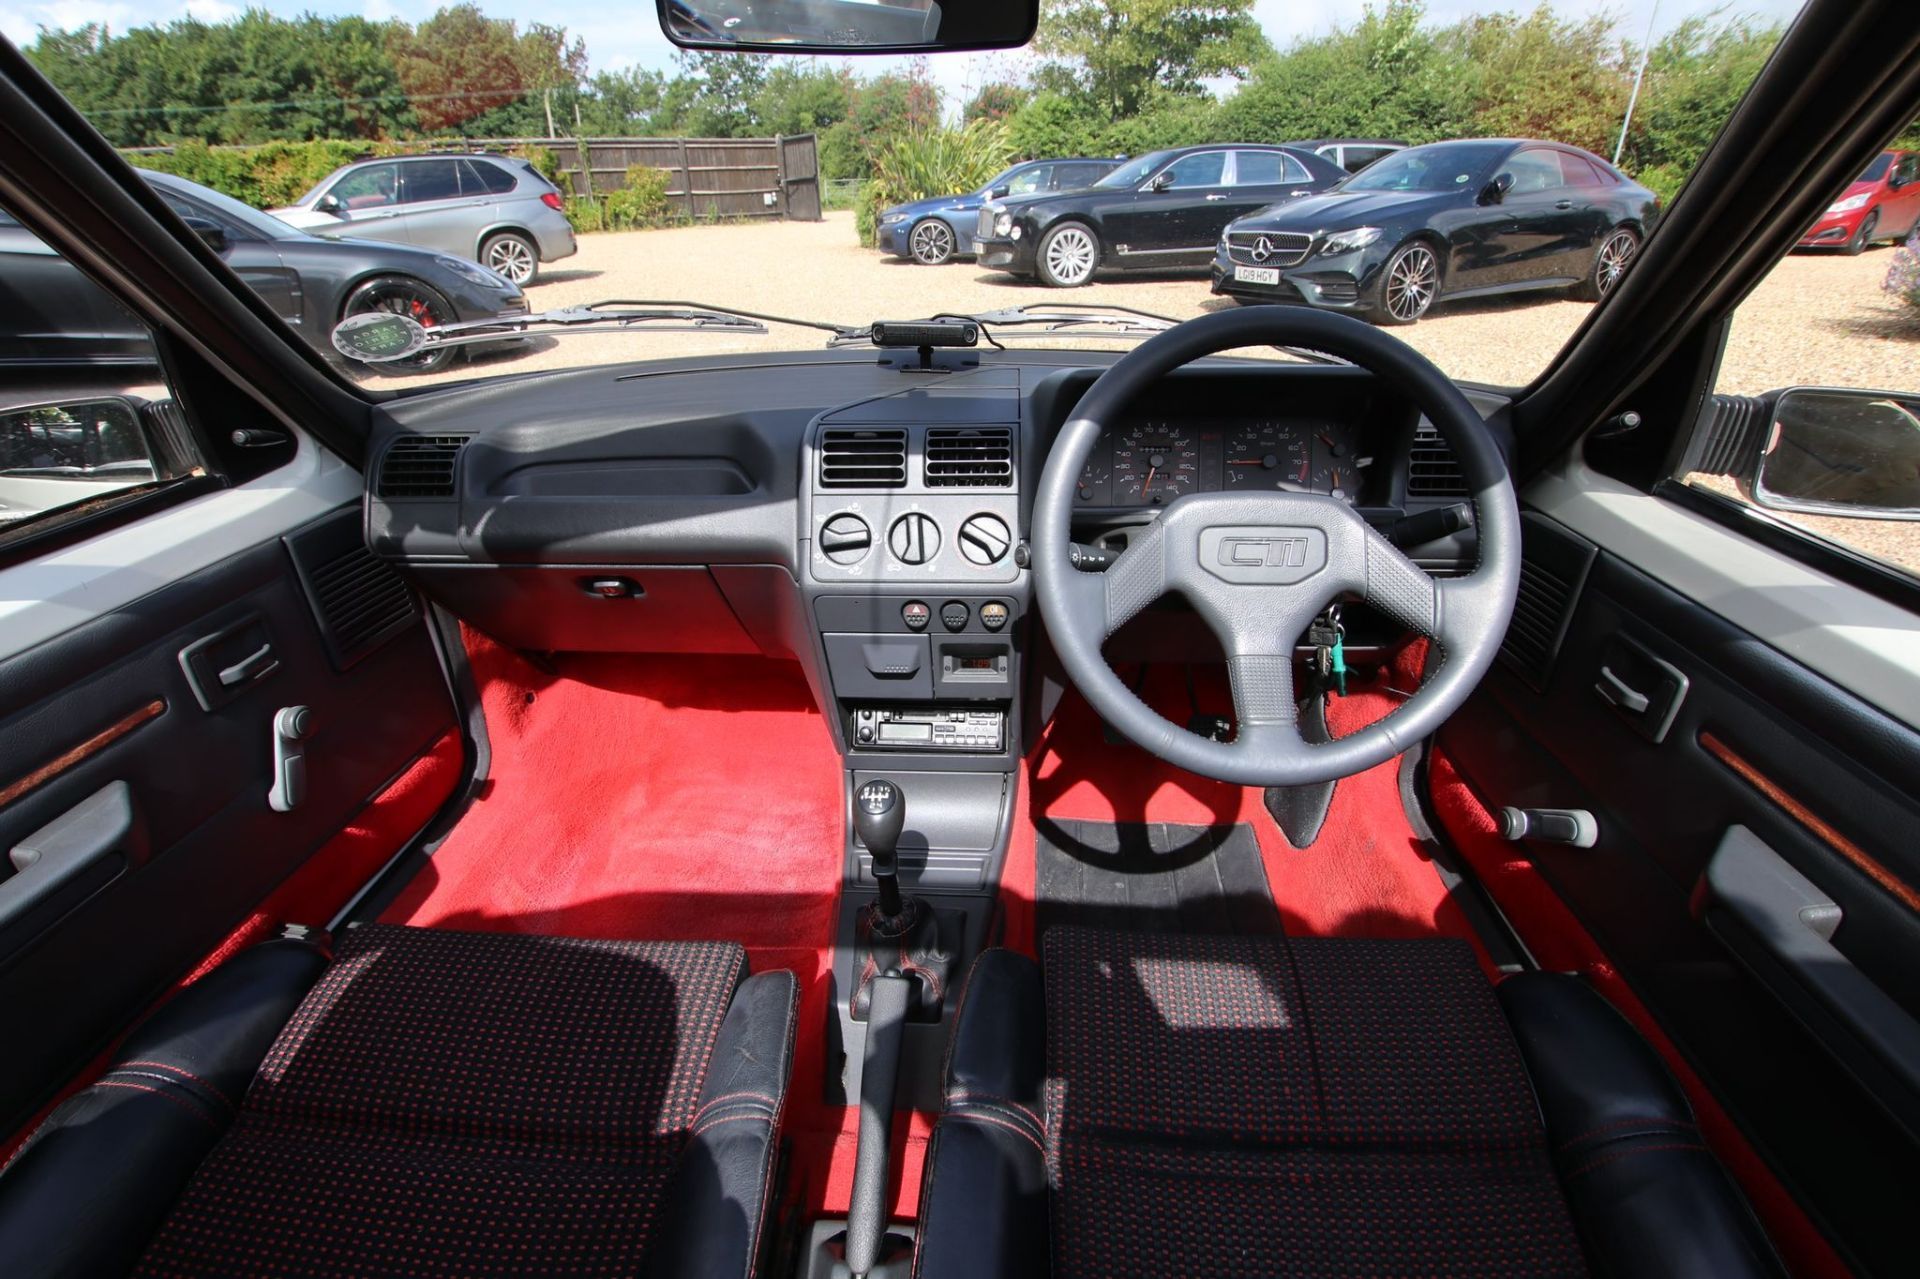 1989 PEUGEOT 205 CTI CABRIOLET CONVERTIBLE, 115hp, 1590cc PETROL ENGINE - OVER 30 SERVICES RECORDED - Image 6 of 12